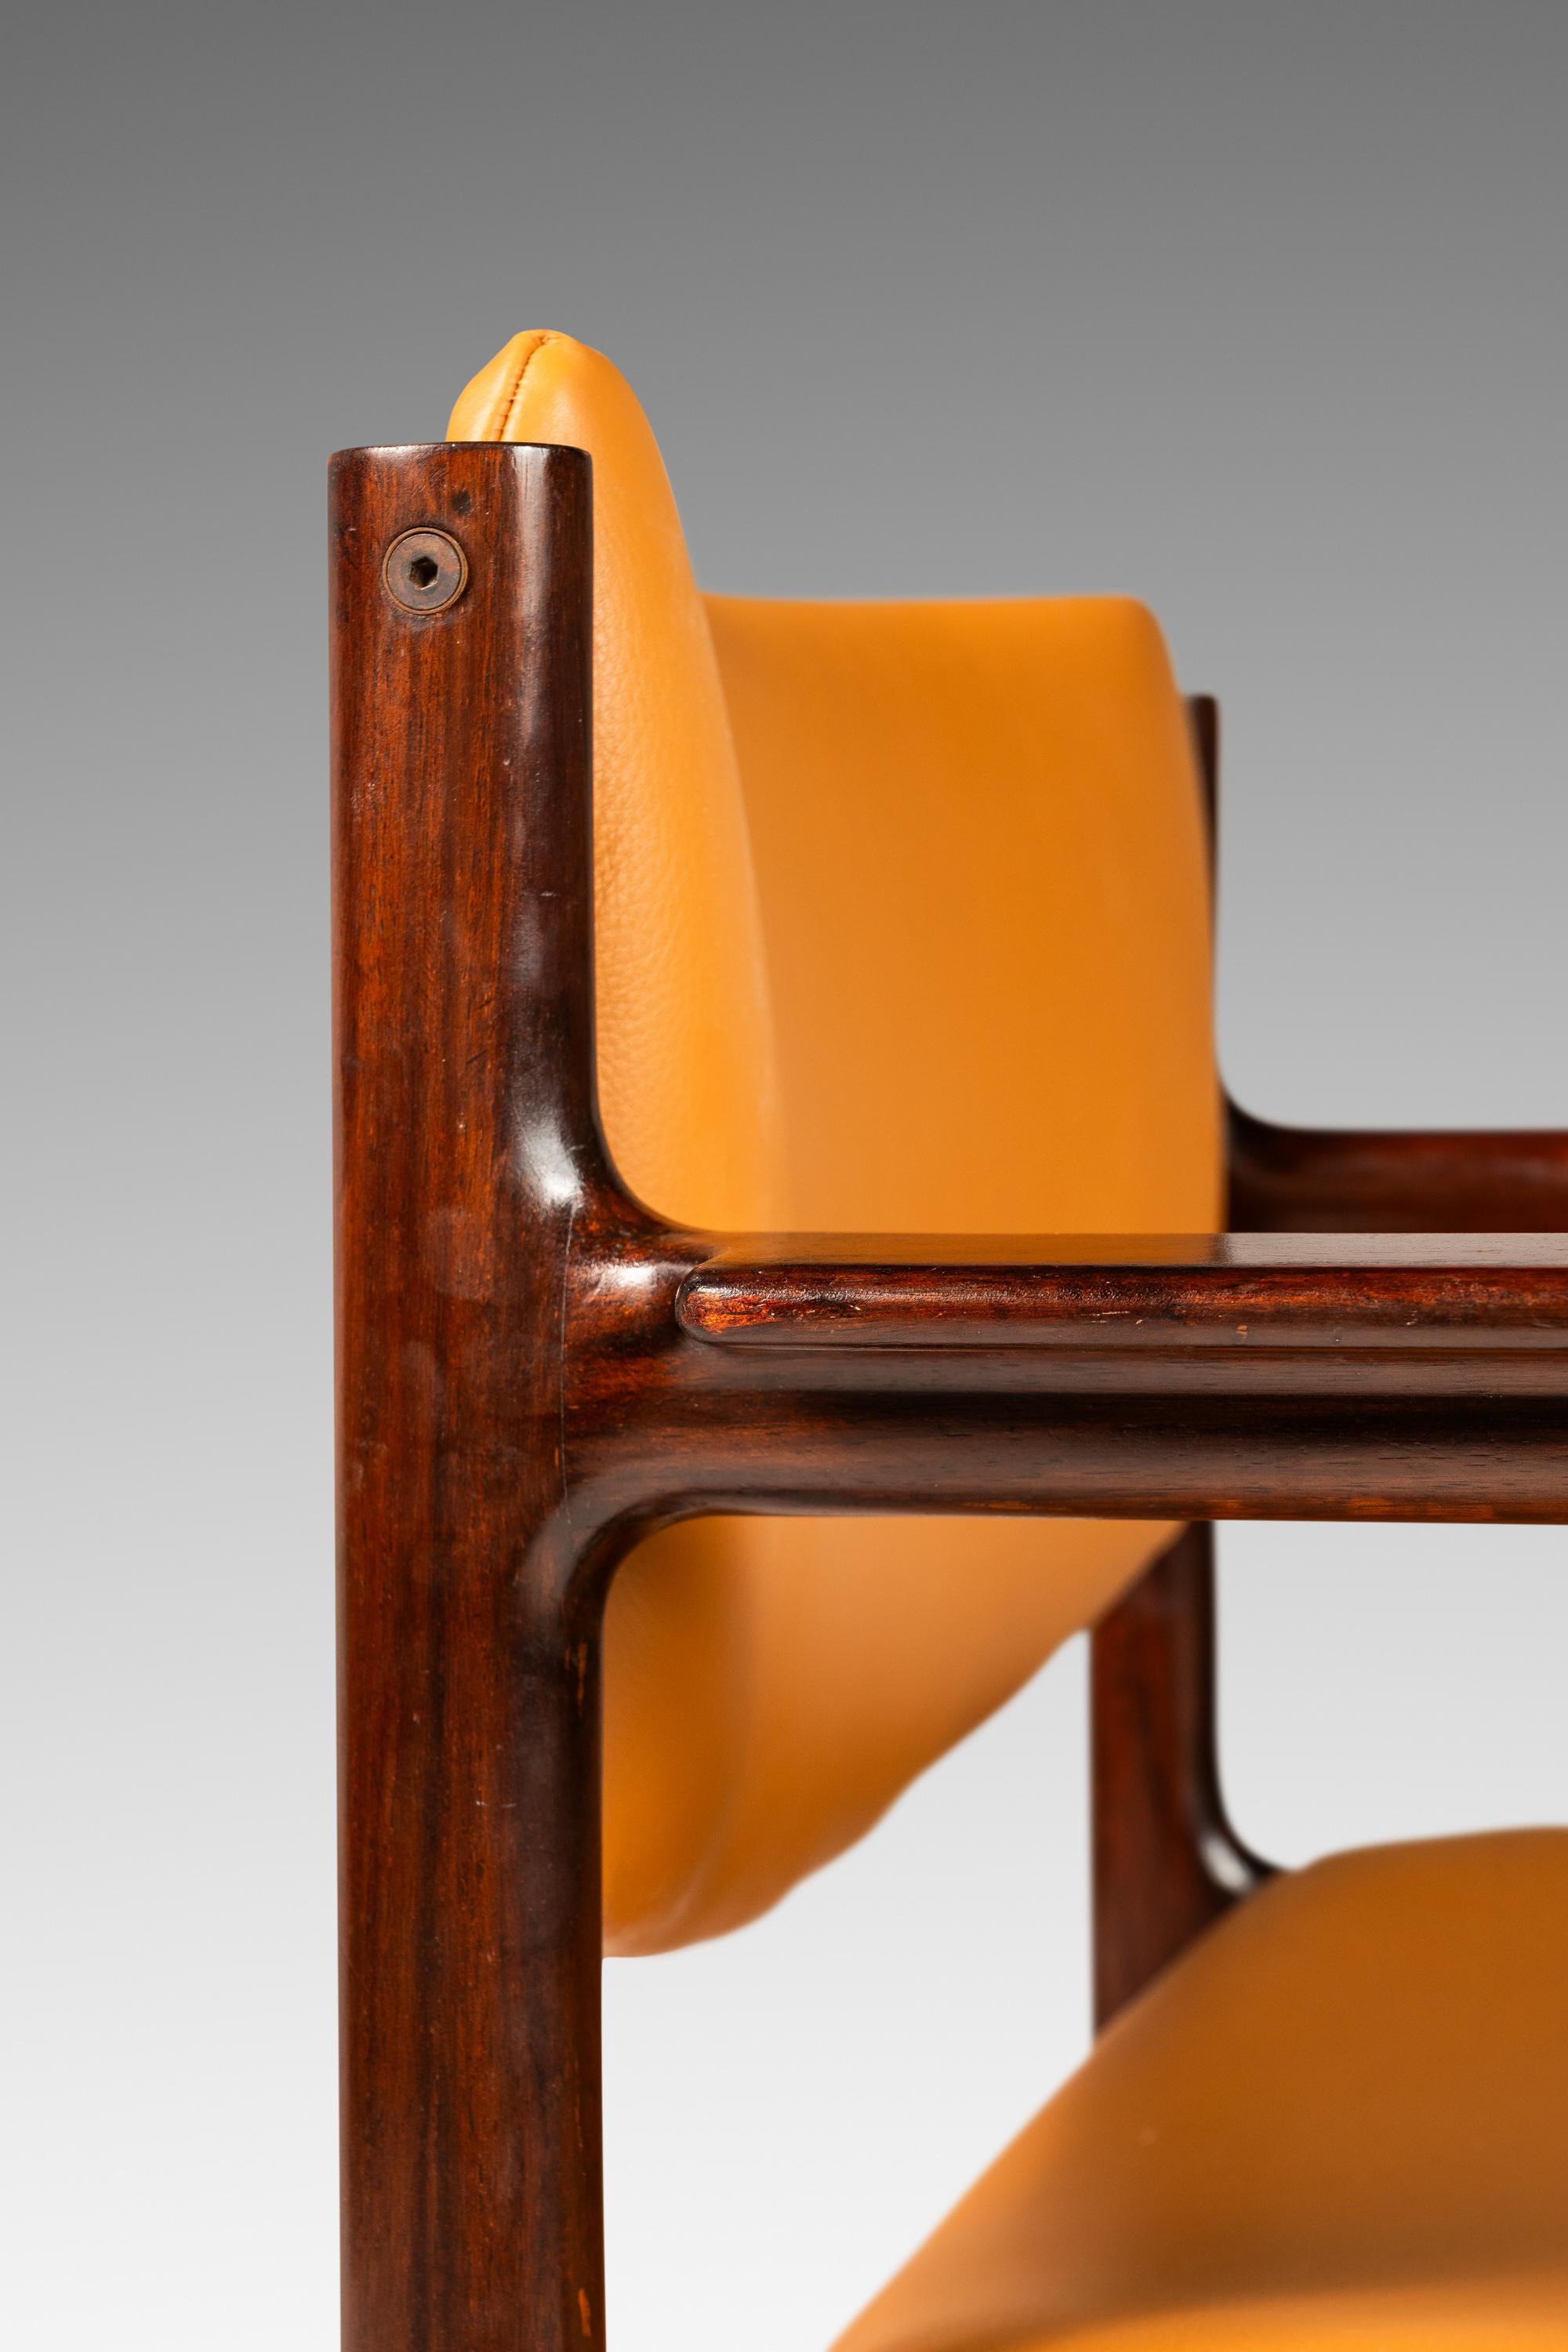 Set of 2 Mahogany & Leather Arm Chairs, Danish Overseas Imports, c. 1960's For Sale 2